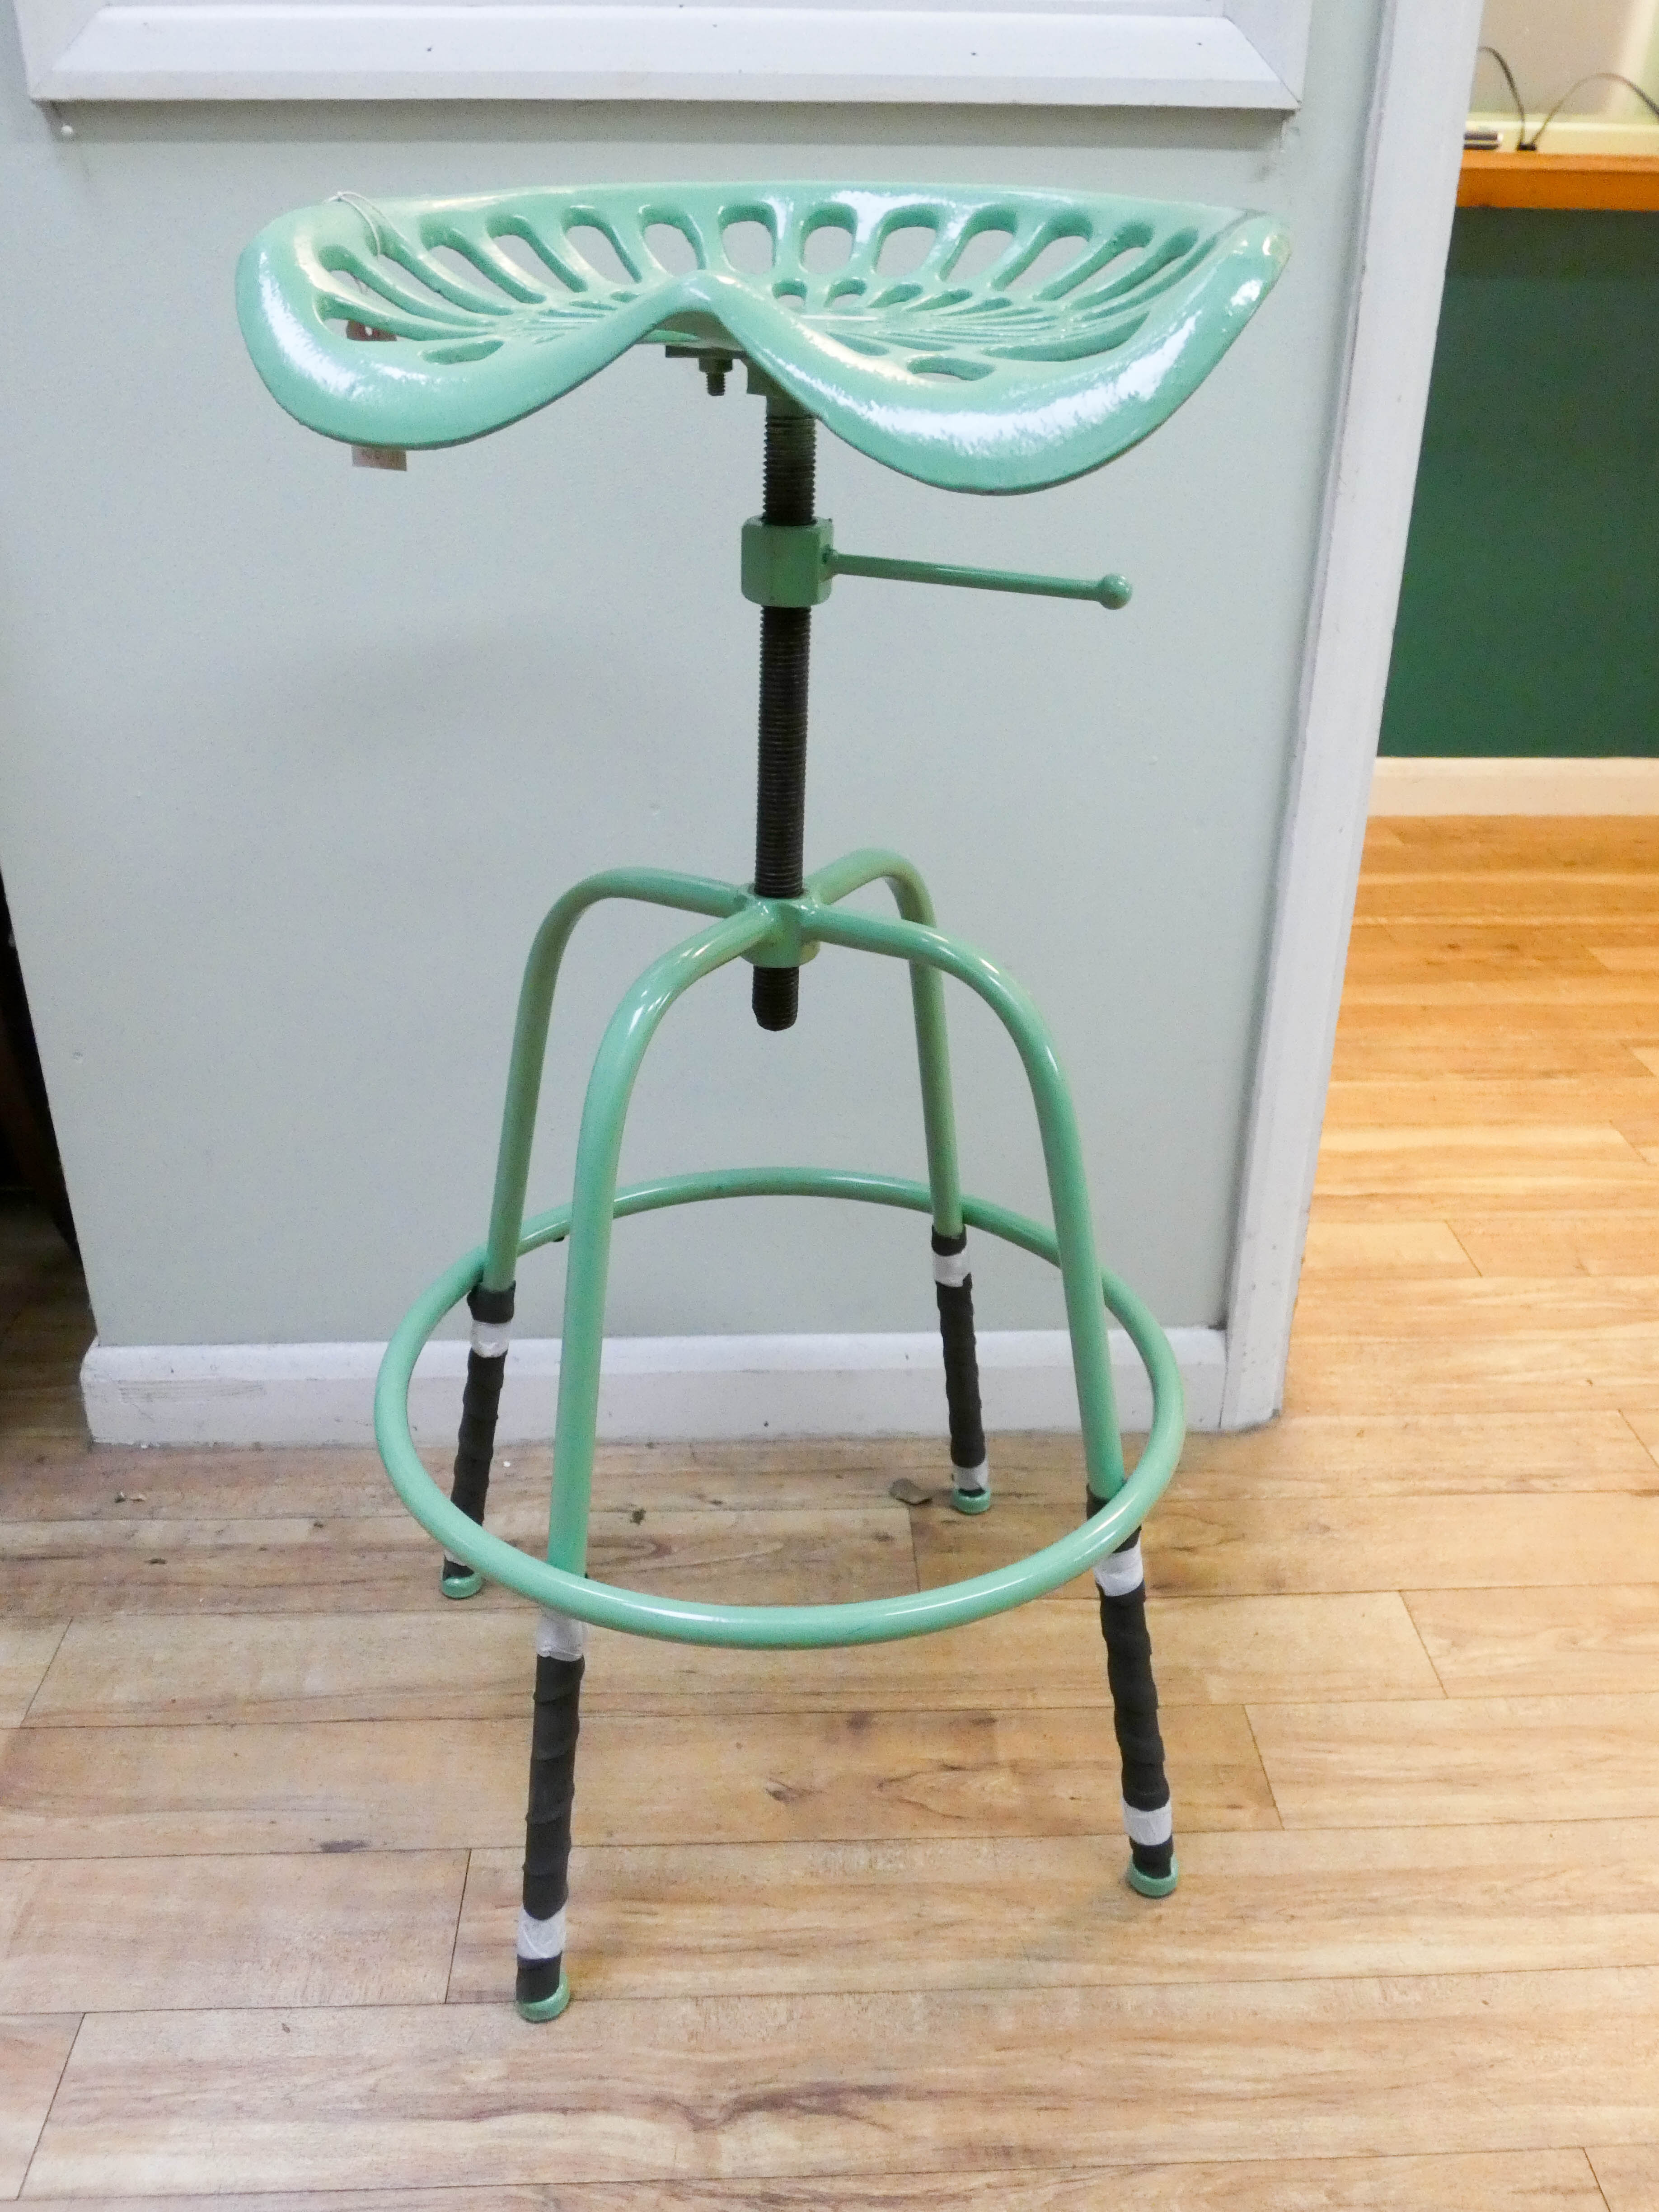 A green adjustable tractor stool